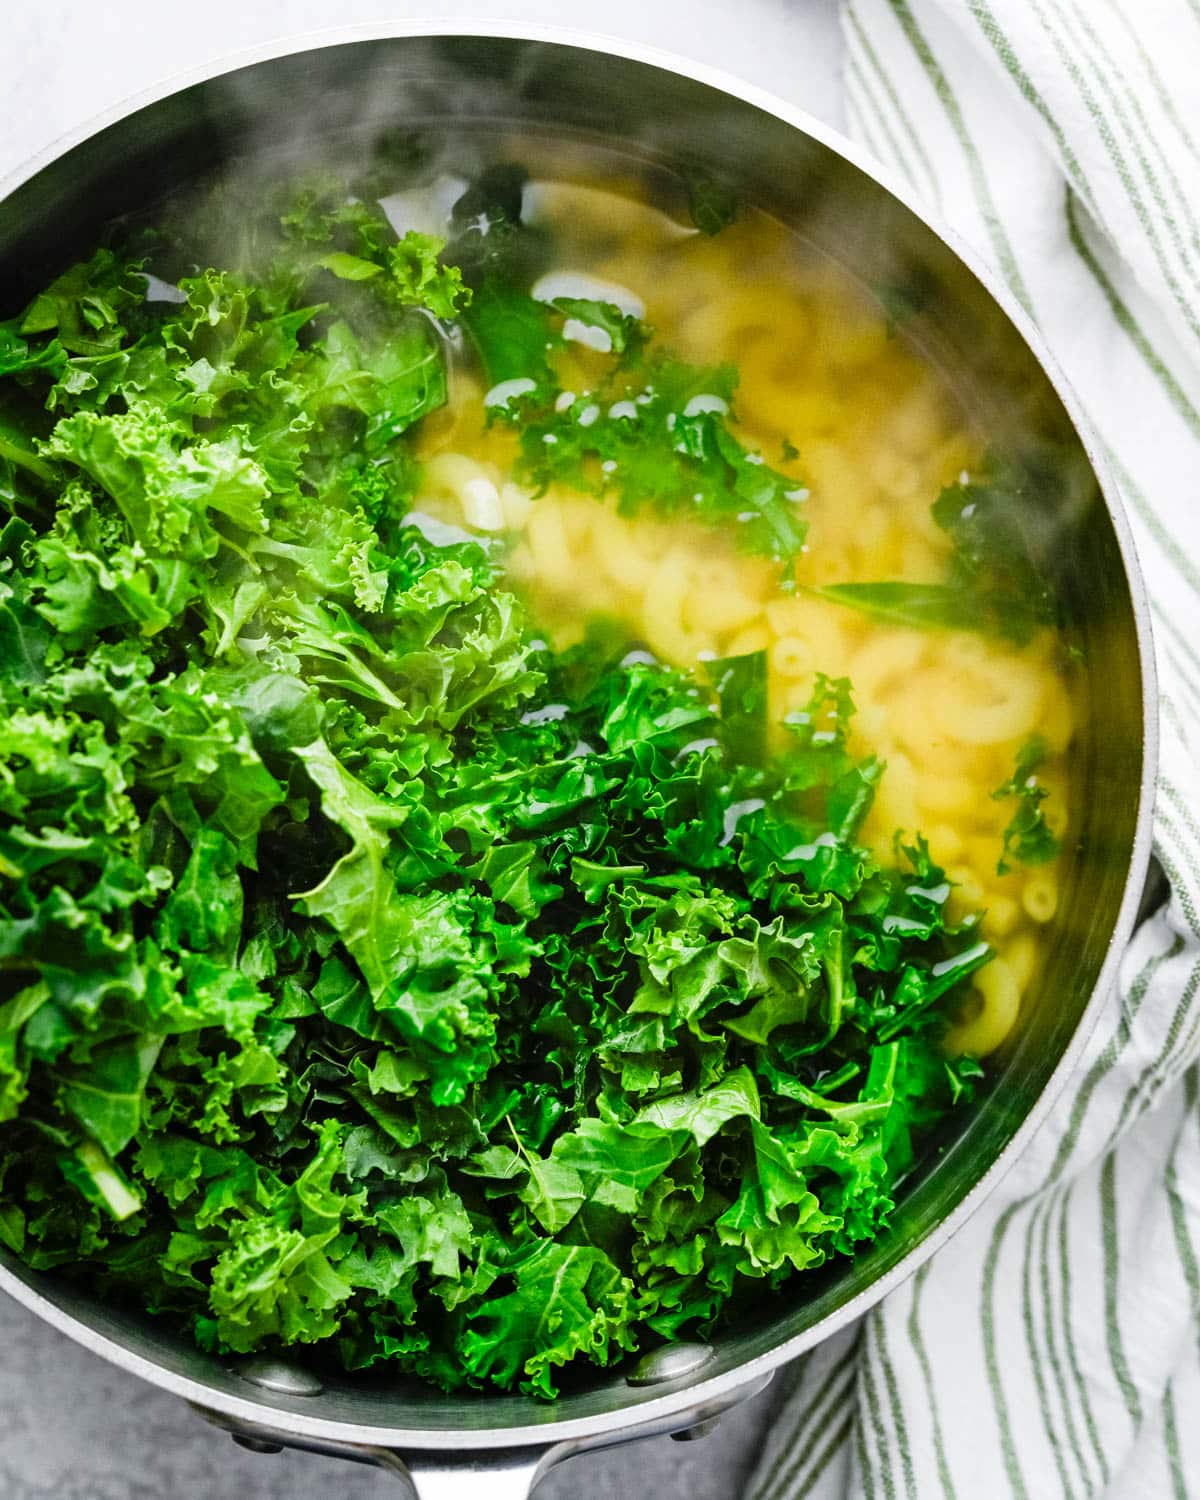 Blanching fresh kale leaves with the cooked macaroni noodles.